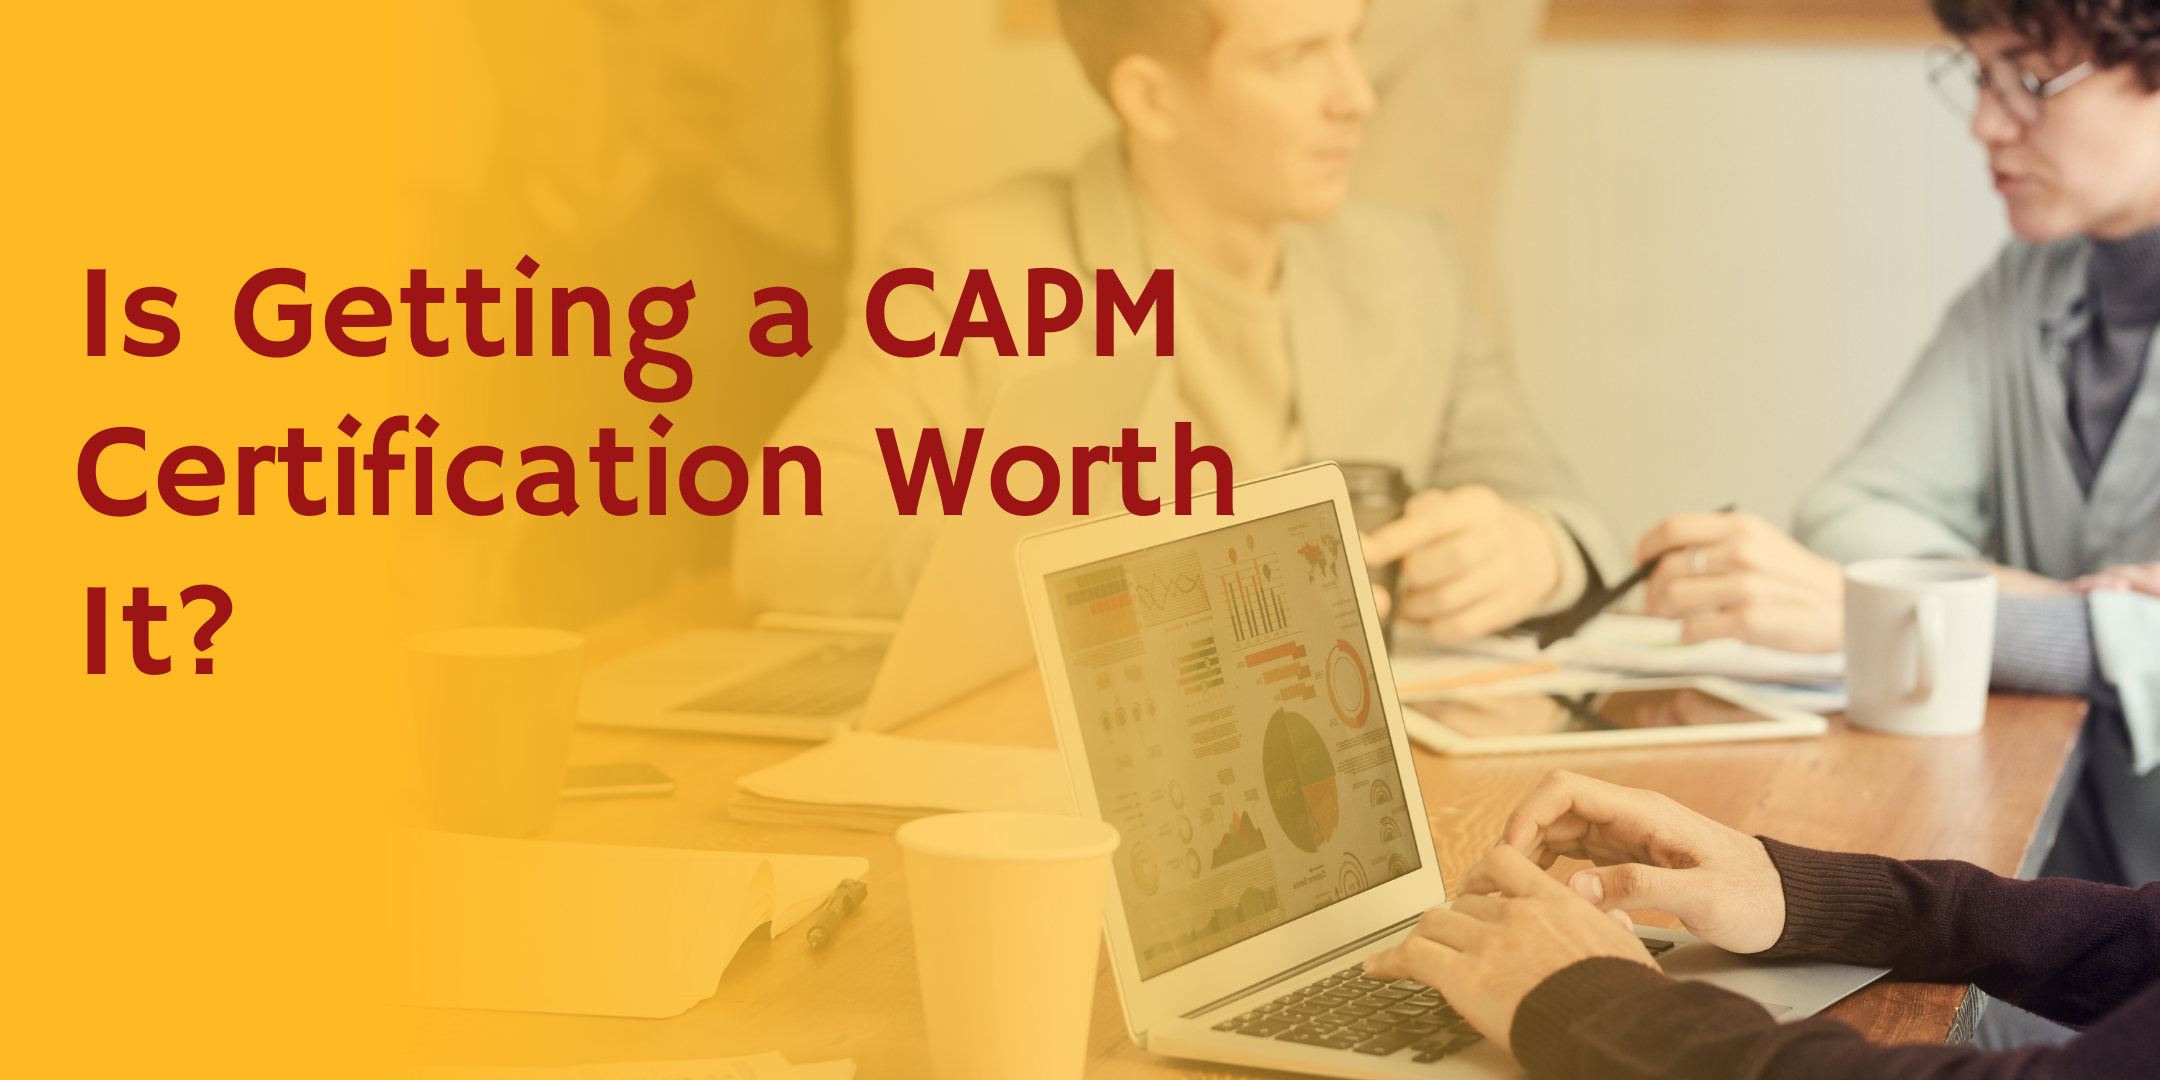 Is Getting a CAPM Certification in USA Worth It?